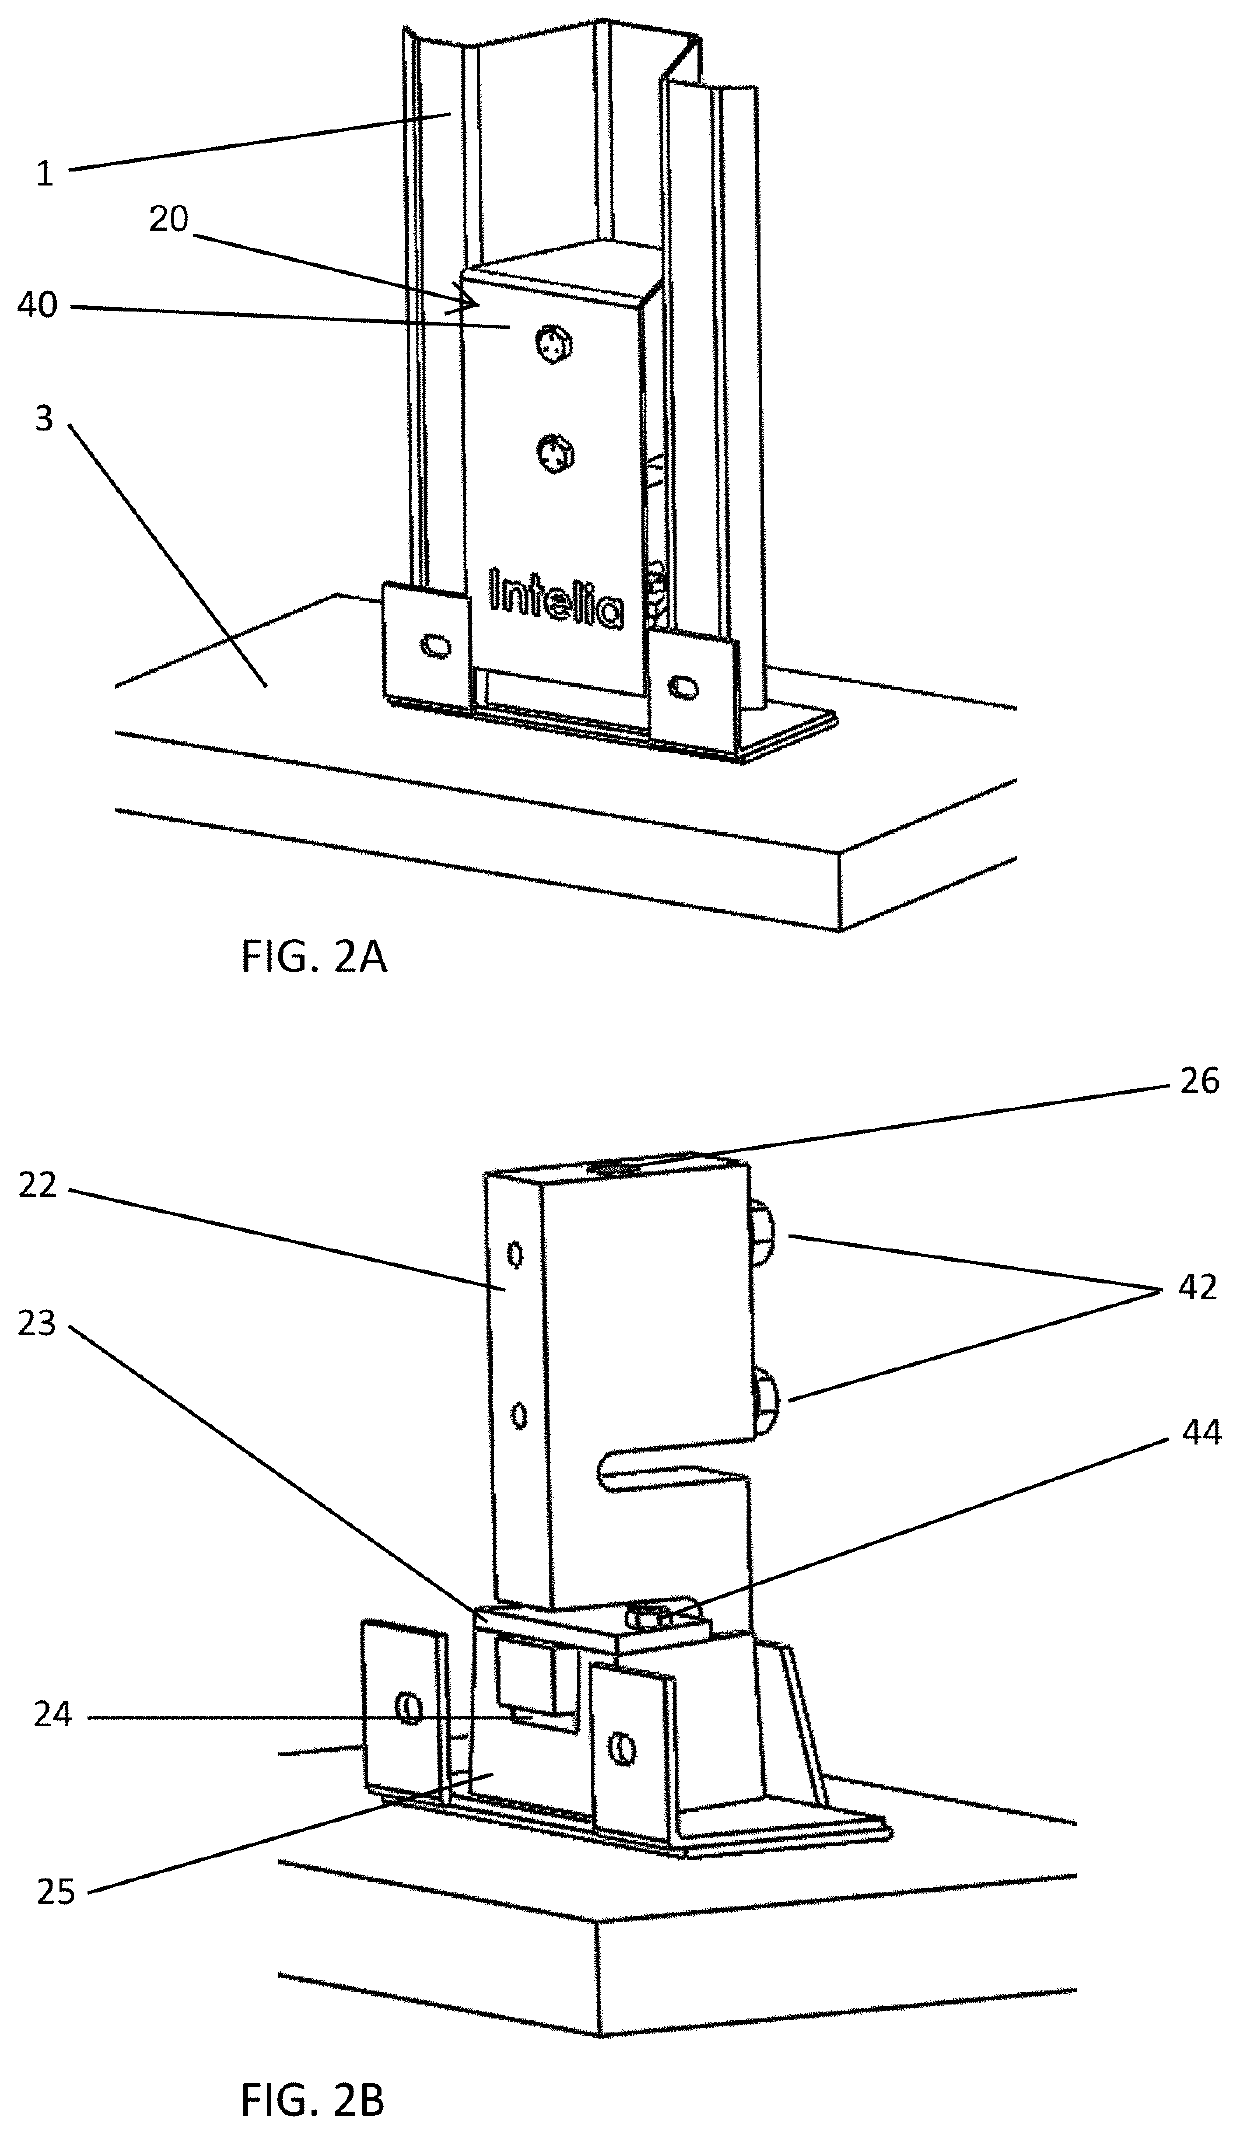 Method and Apparatus to Monitor a Reservoir or a Structure